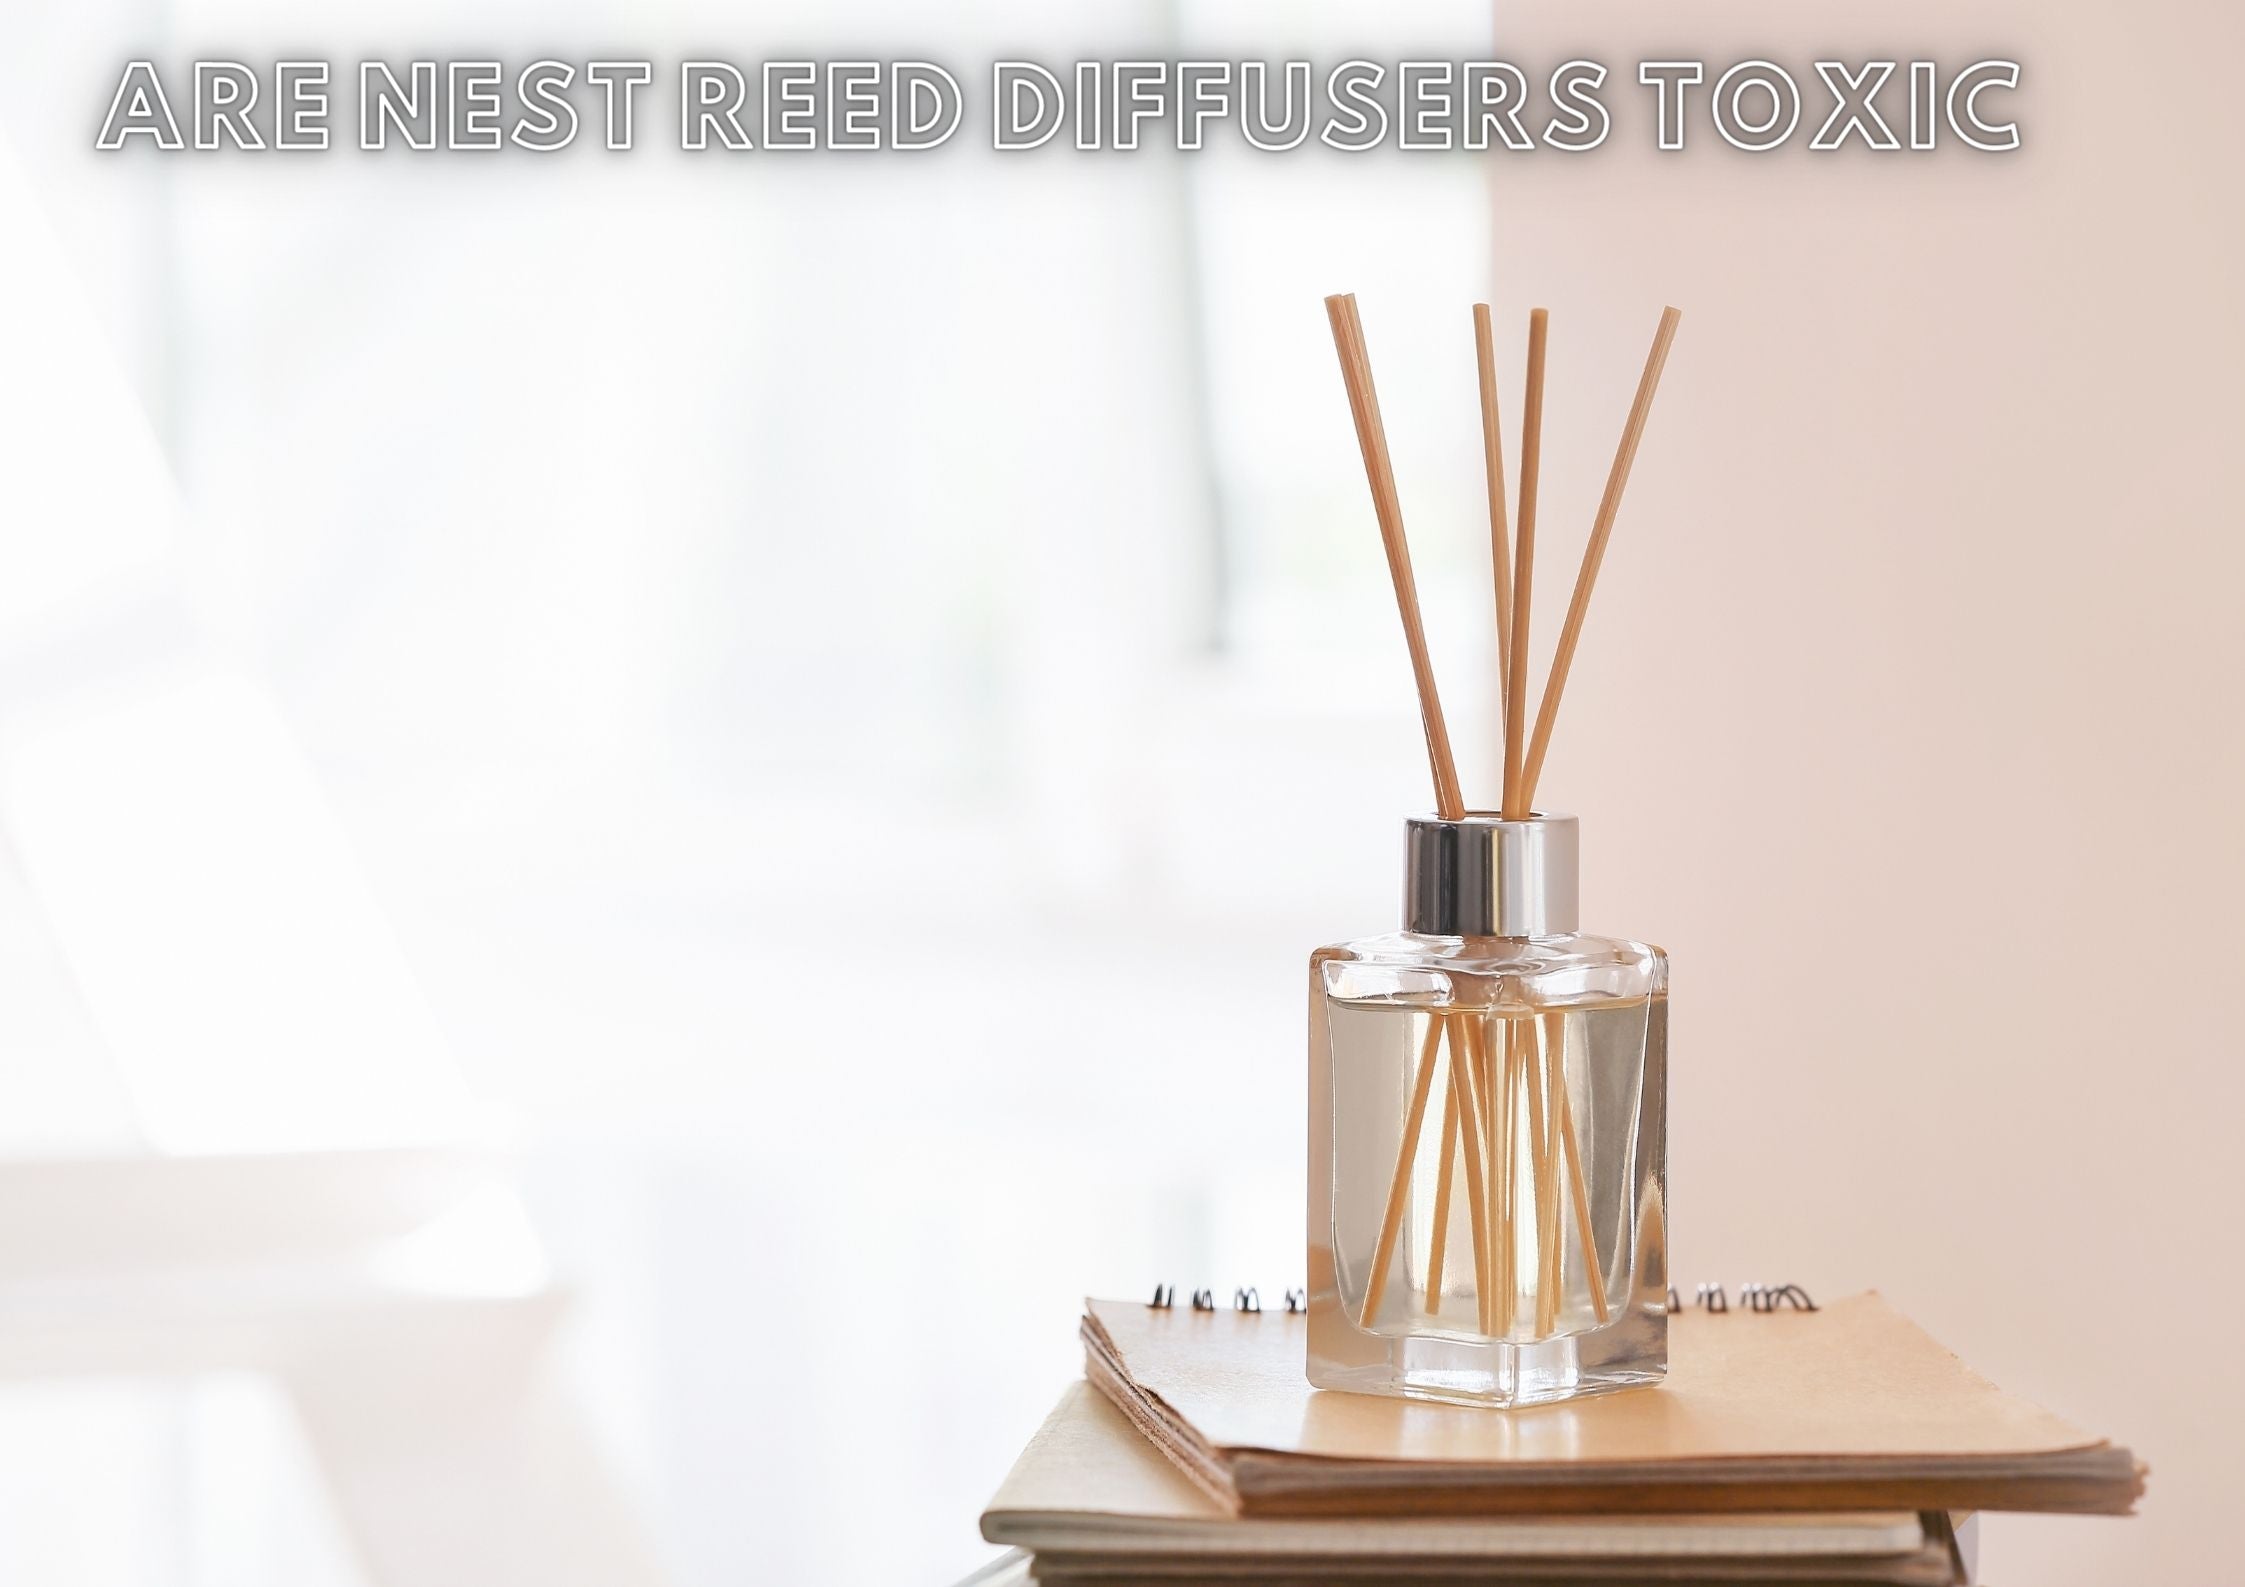 Are nest reed diffusers toxic